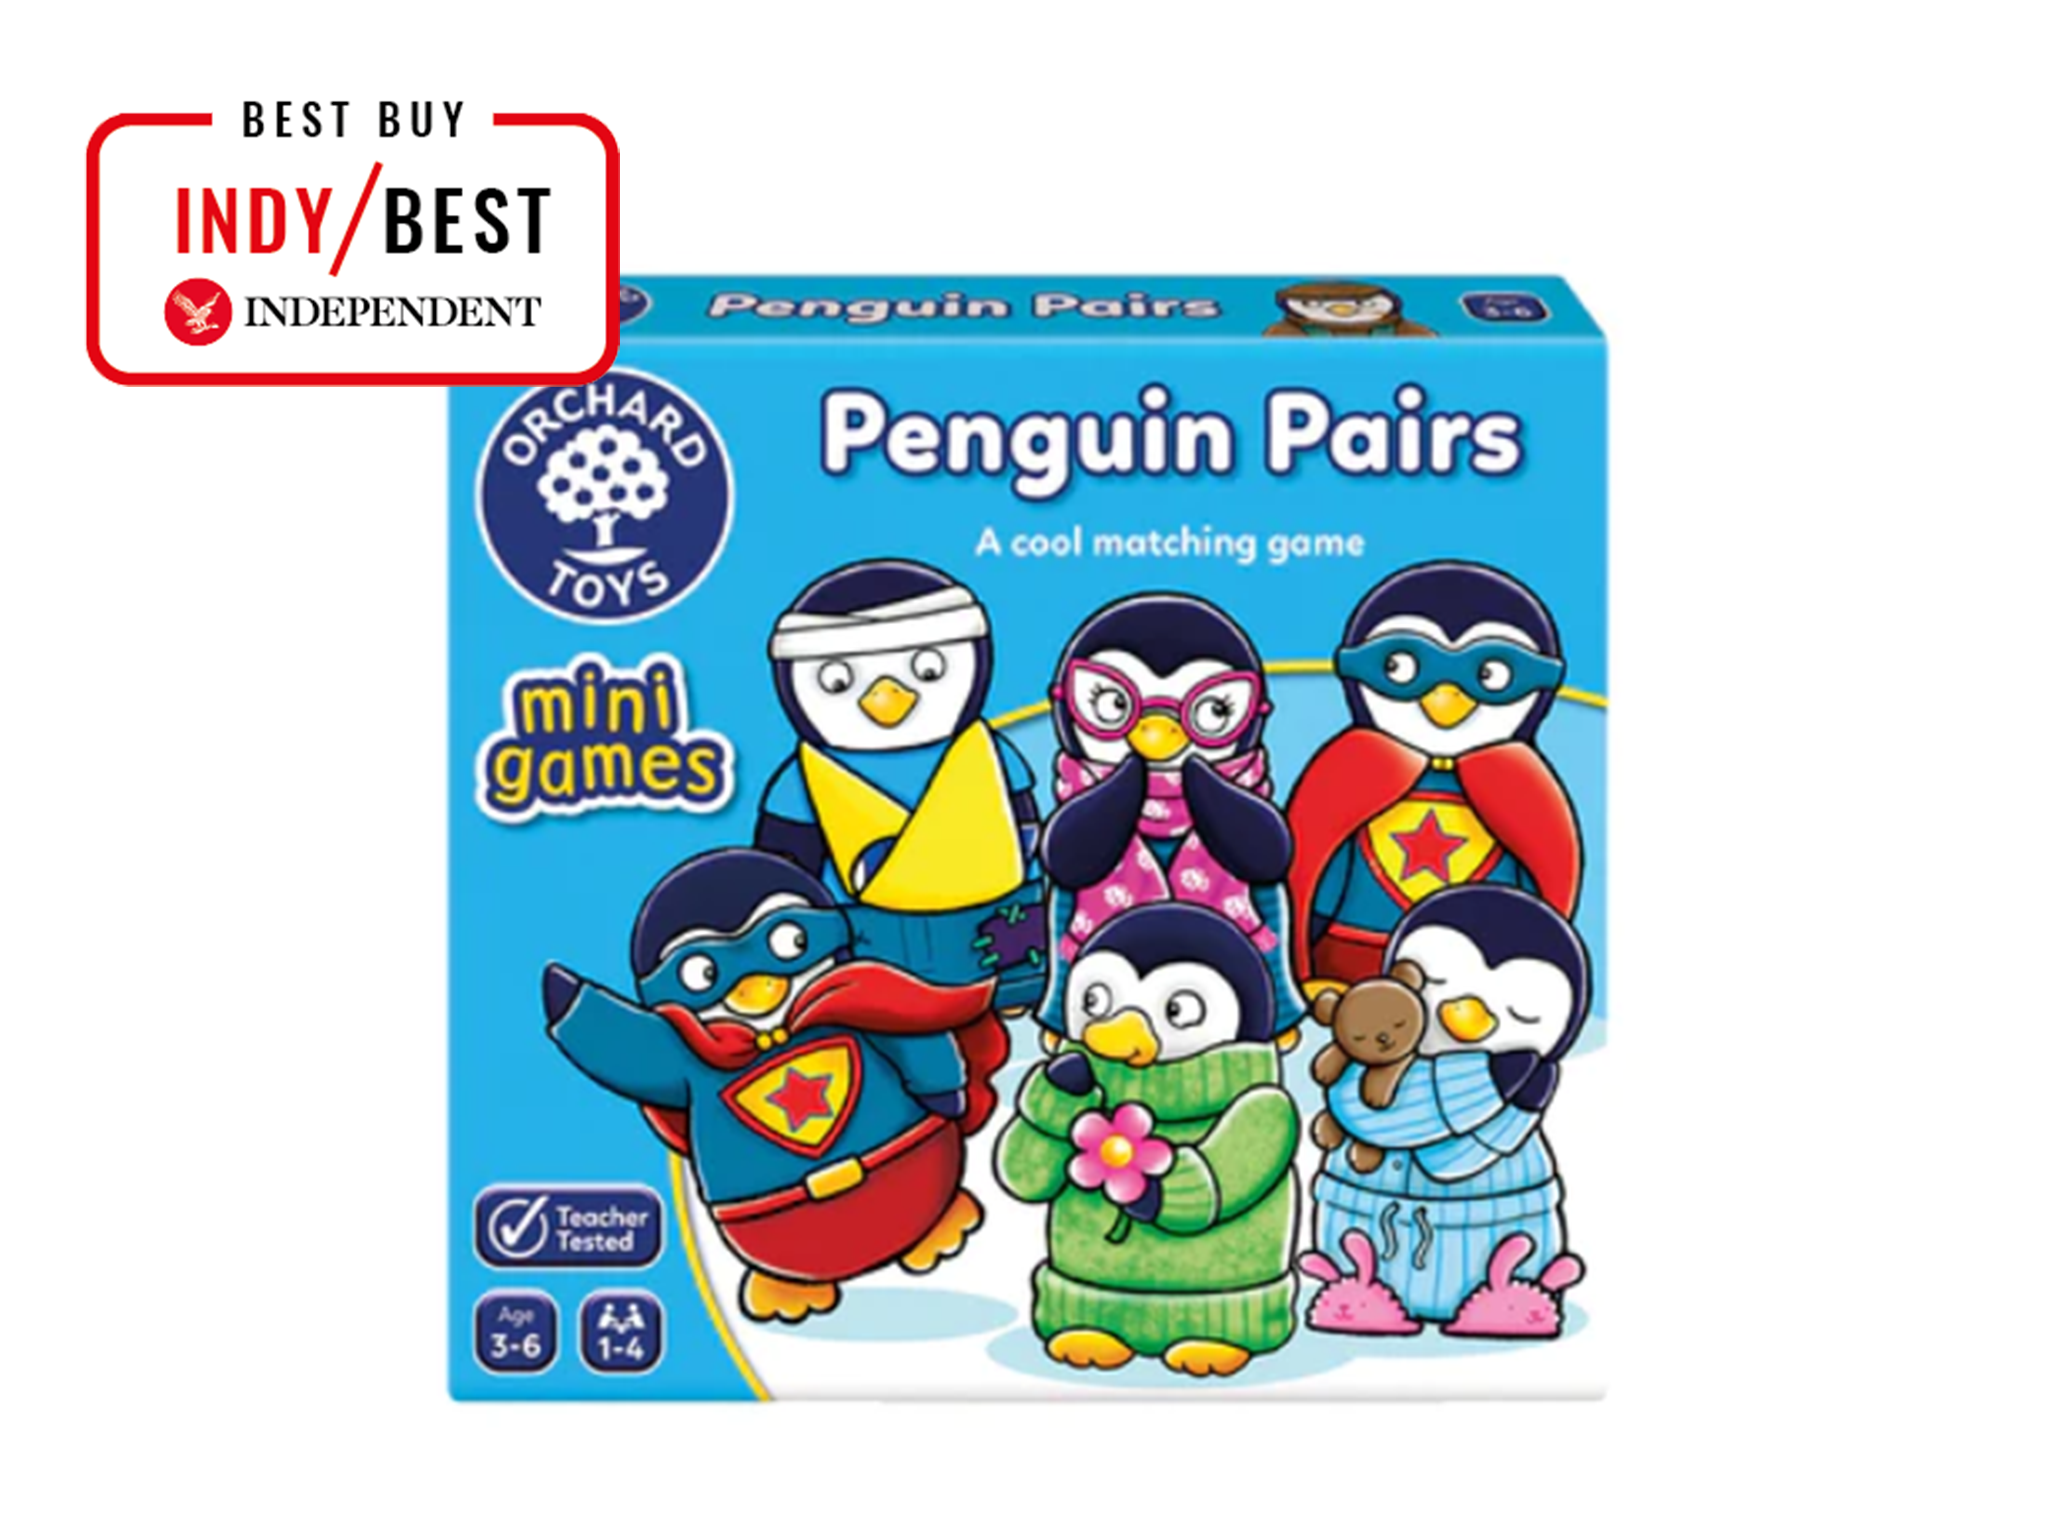 Orchard Toys penguin pairs game